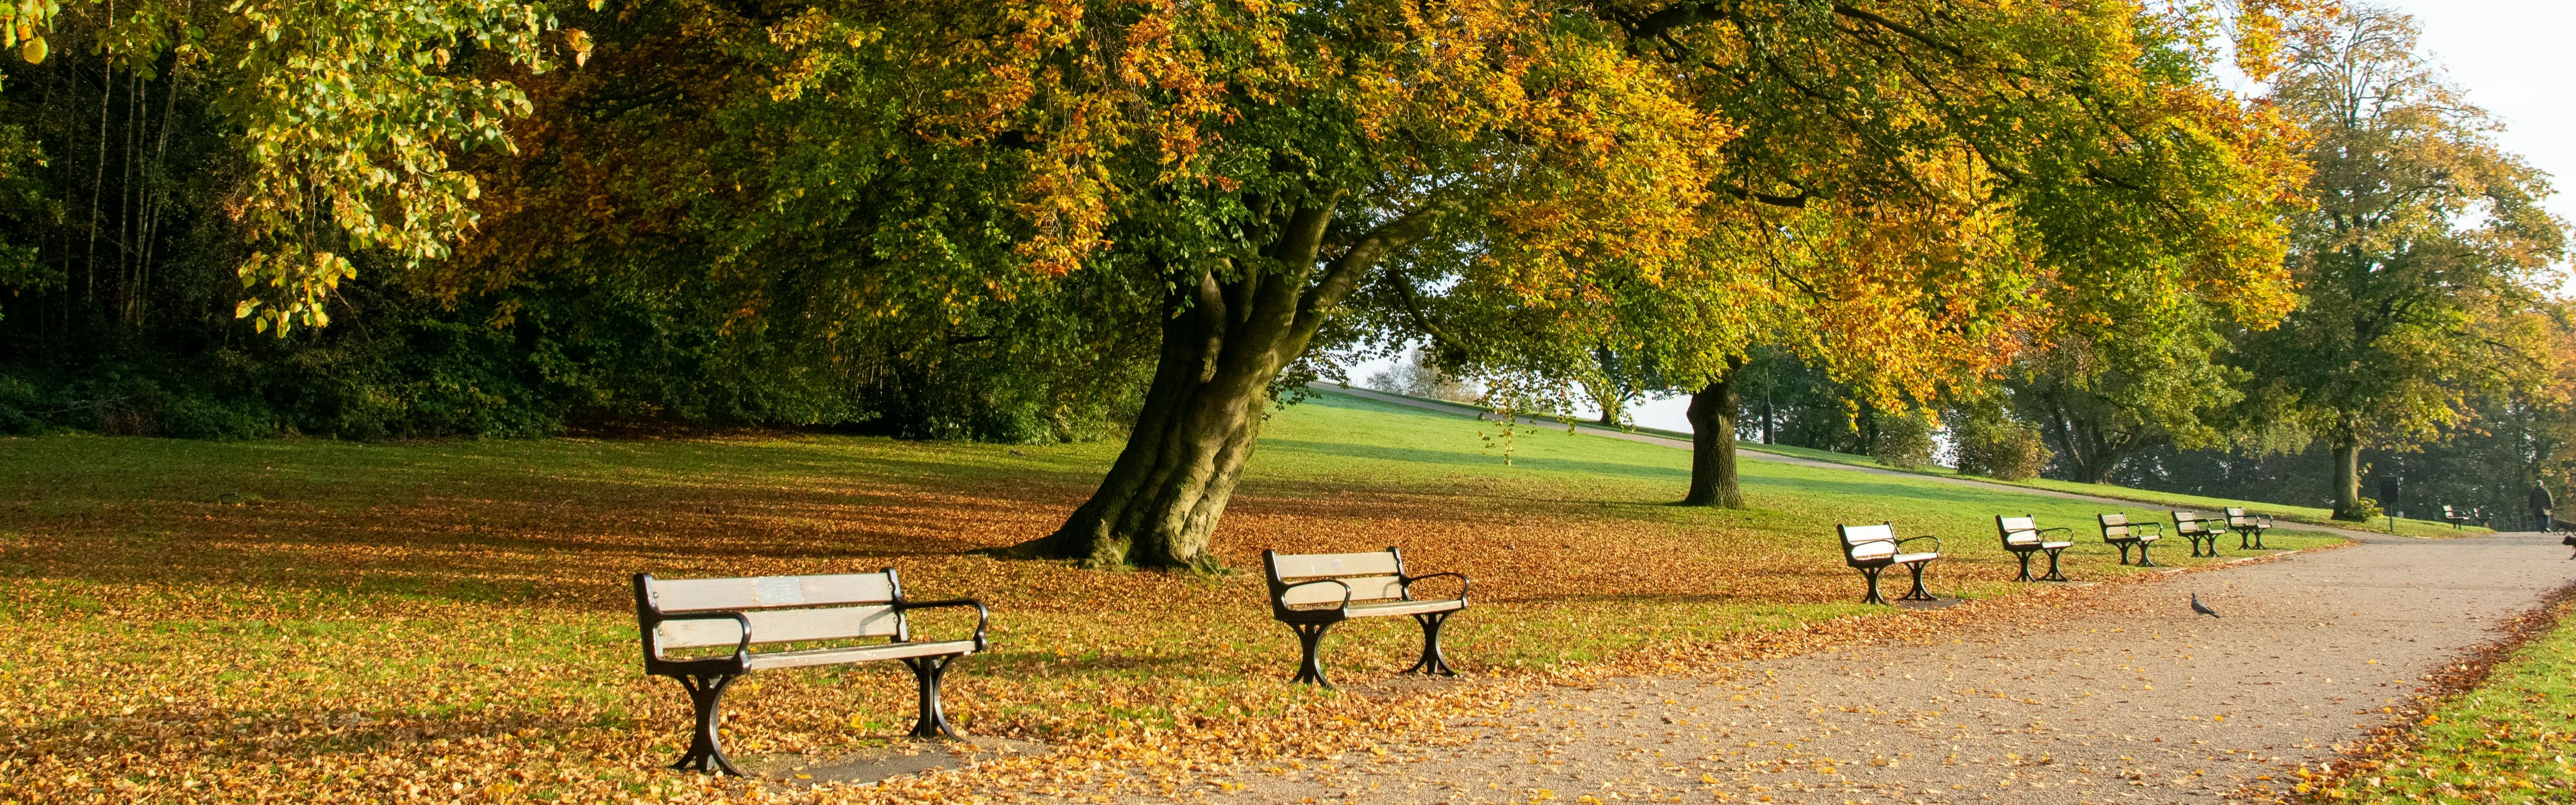 A row of empty park benches stretches down an empty path. The surrounding lawn and the benches are covered in fallen yellow leaves. 